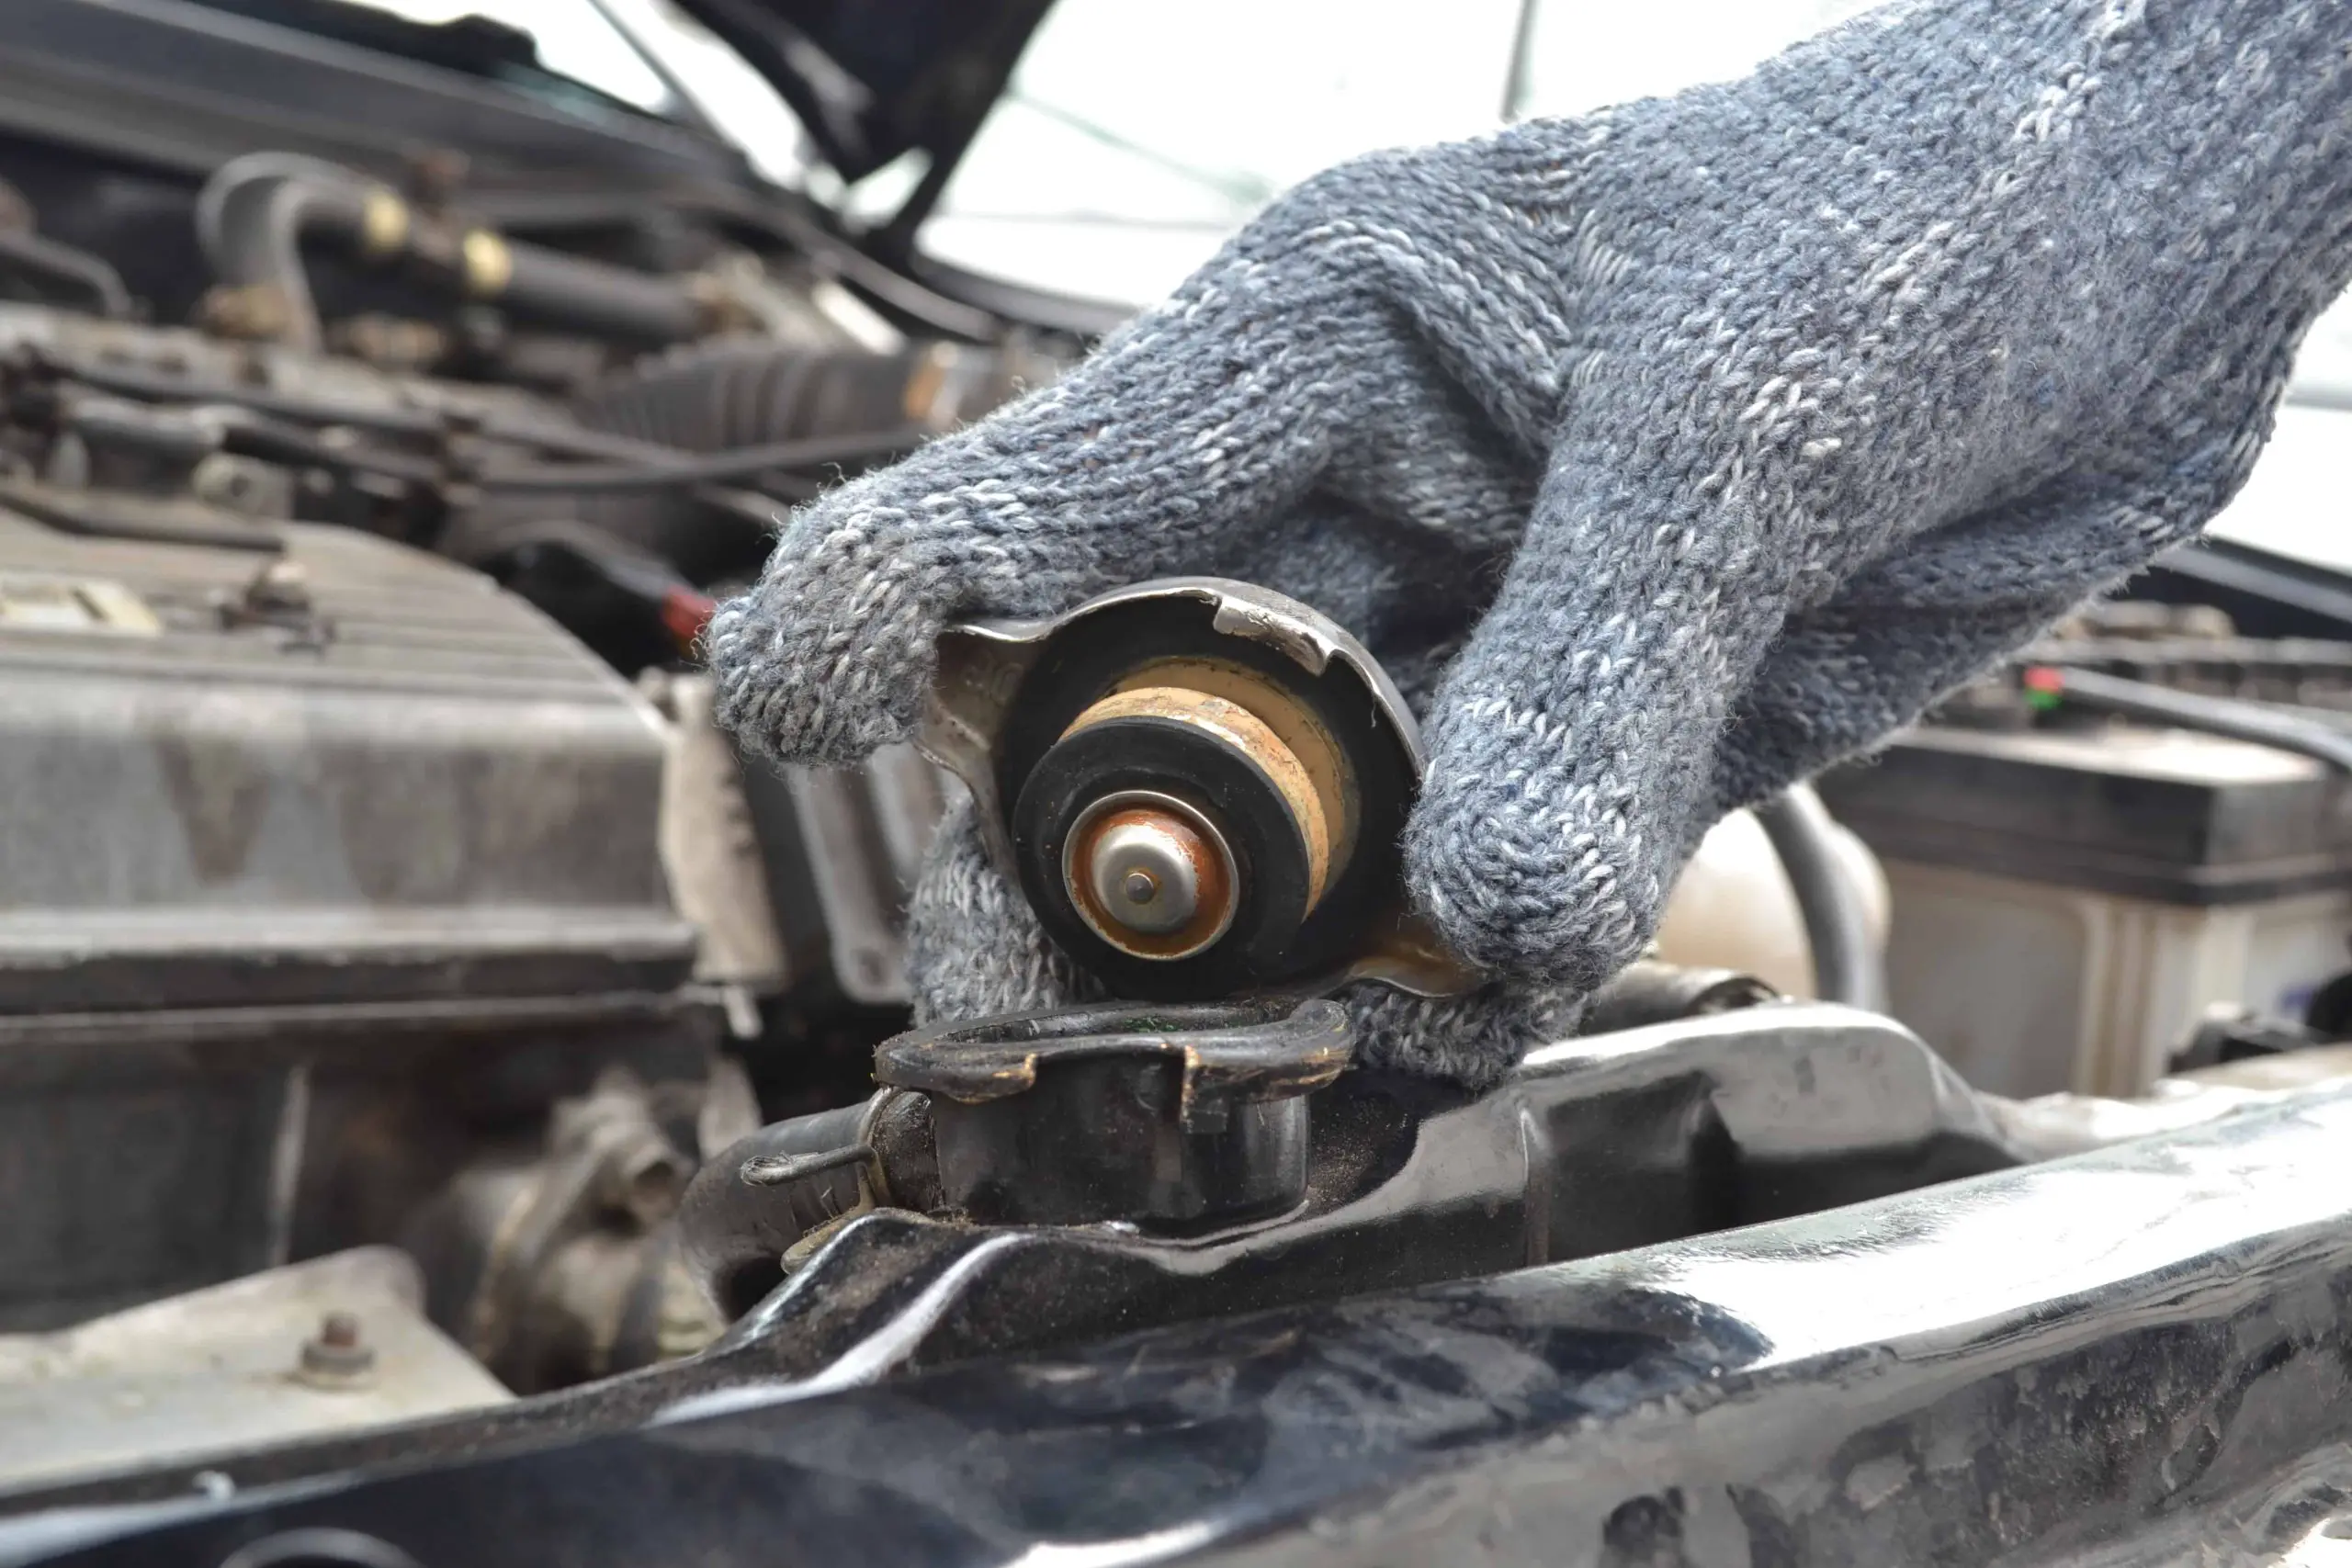 How to Replace a Radiator Cap